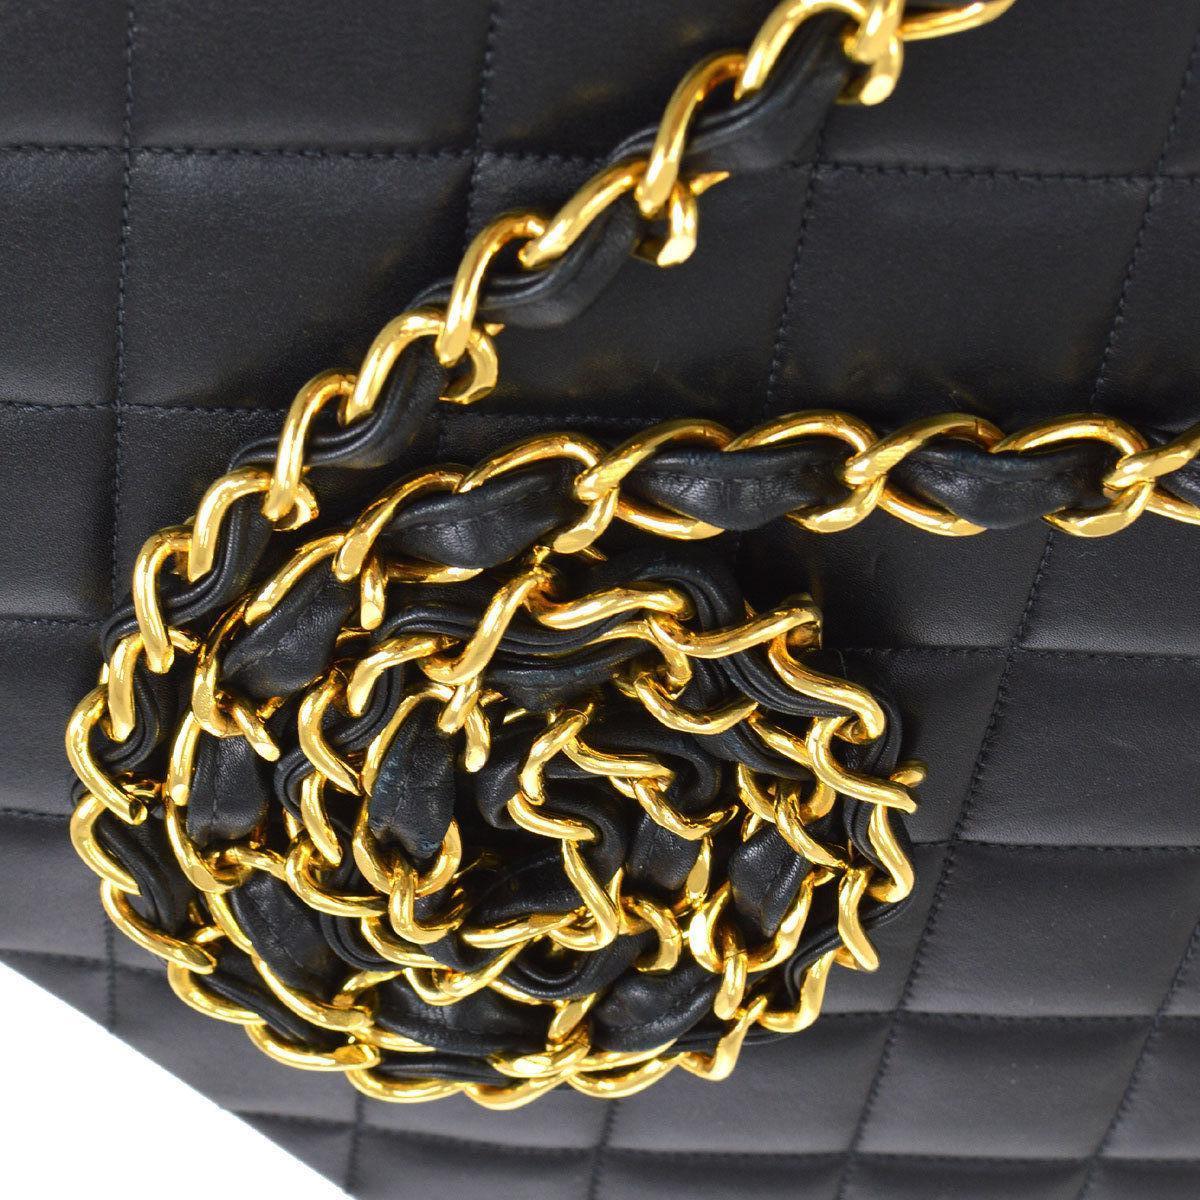 Chanel Rare Black Lambskin Leather Extra Large Evening Shoulder Flap Bag

Lambskin
Gold tone hardware
Leather lining
Date code present
Made in France 
Shoulder strap drop 23